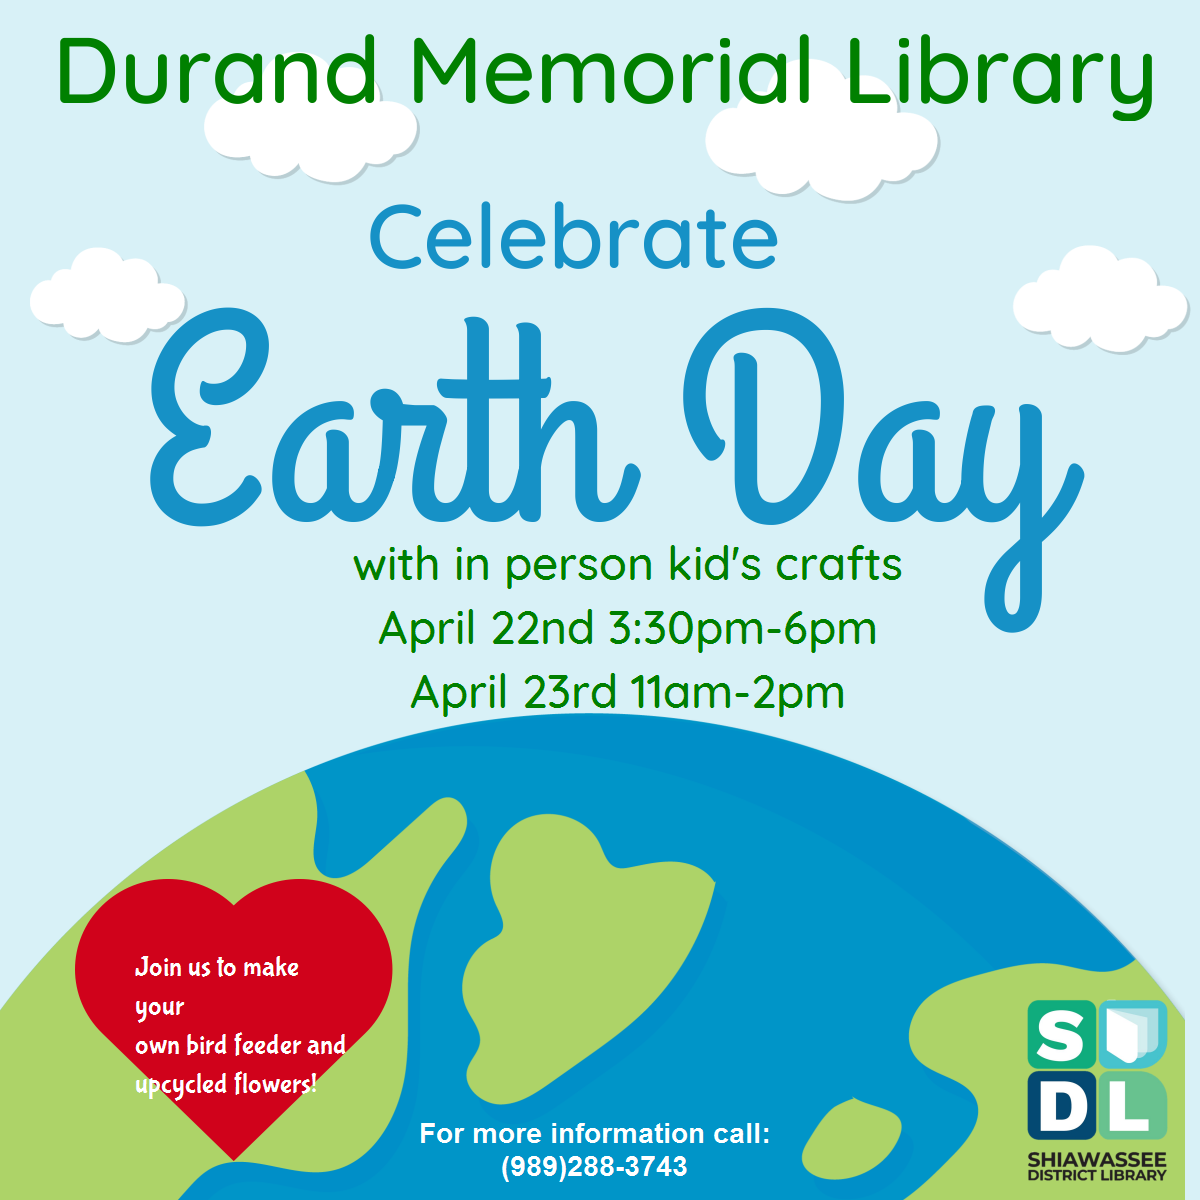 Earth Day crafts for kids at Durand Memorial Library April 22 3:30 to 6:00 p.m.  and Saturday, April 23 from 11 a.m. to 2 p.m.